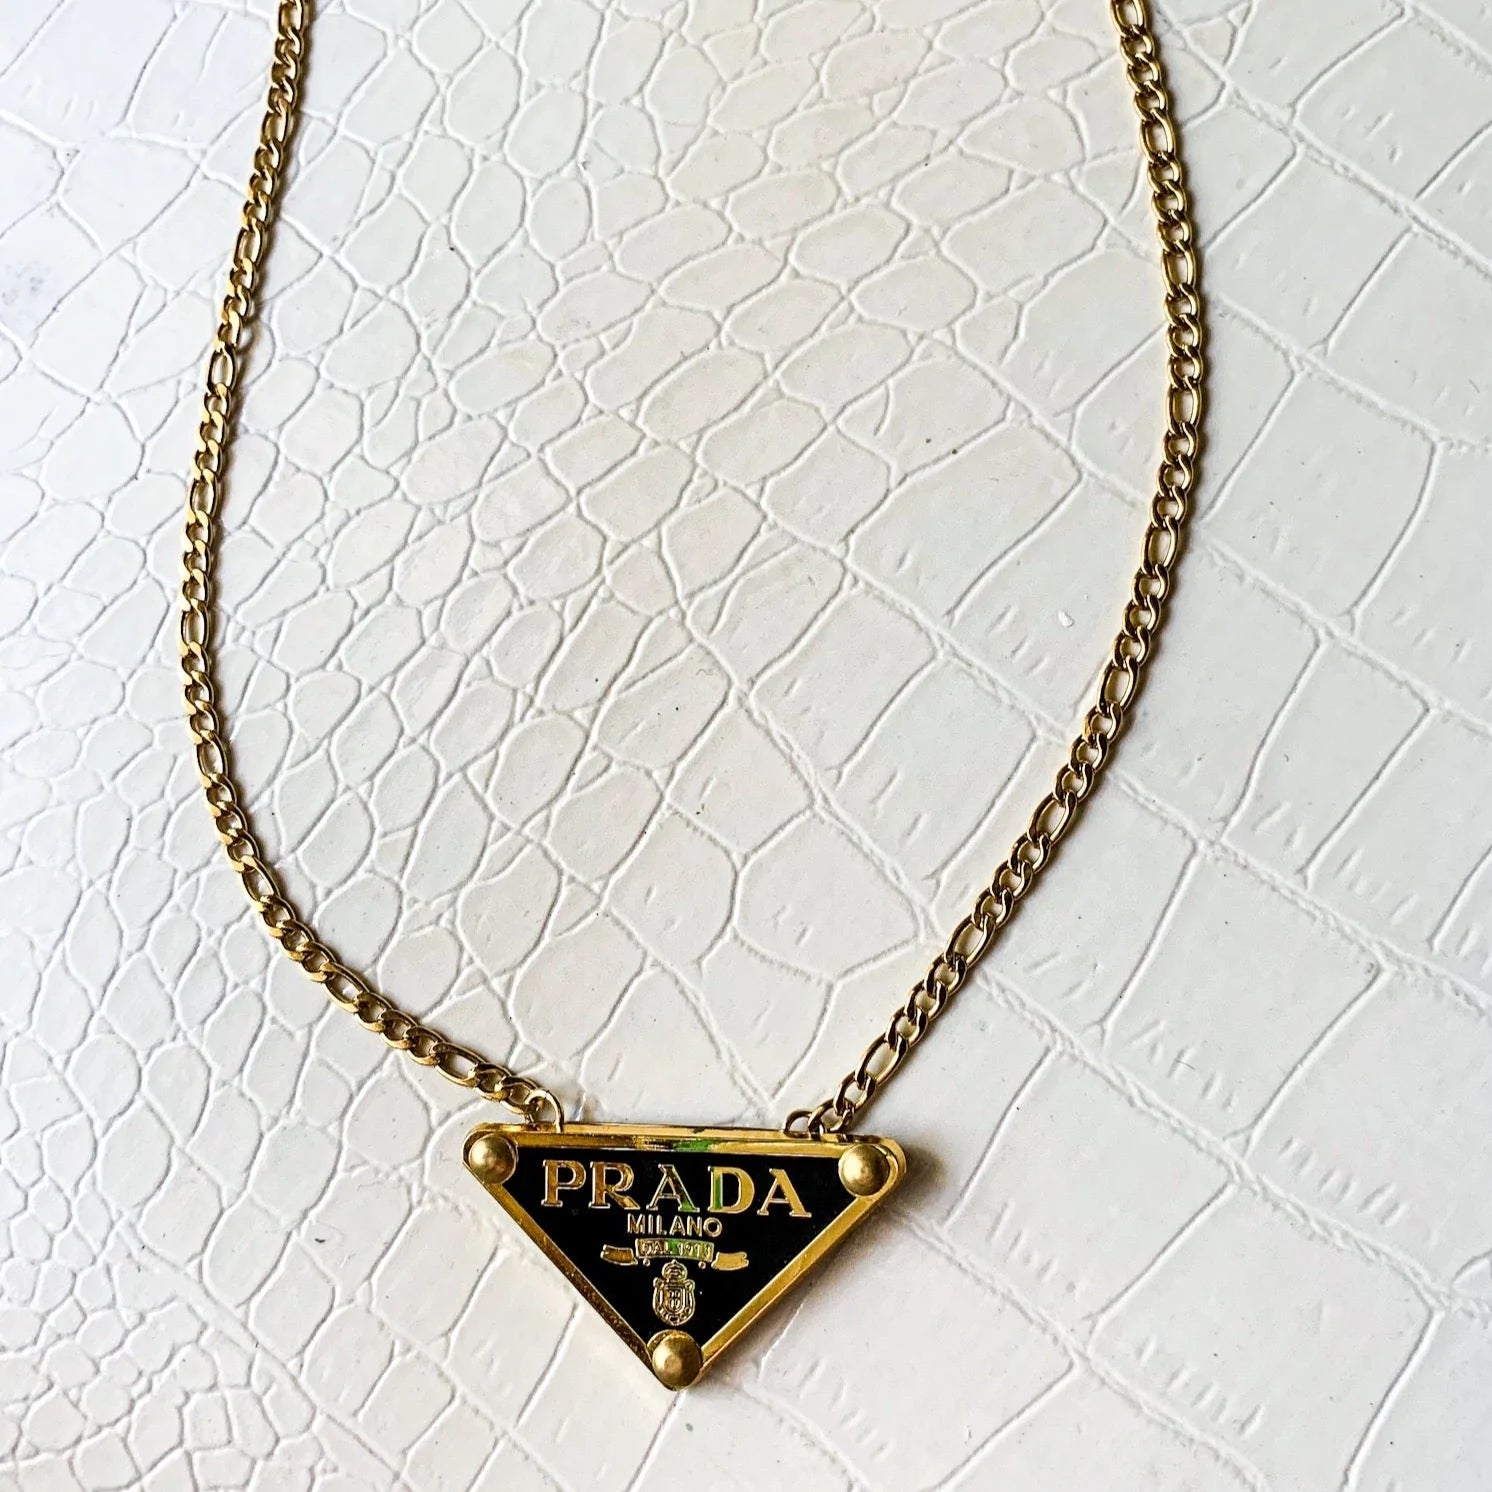 NEW Silver Plated Vintage PRADA Necklace For Men And Women | eBay